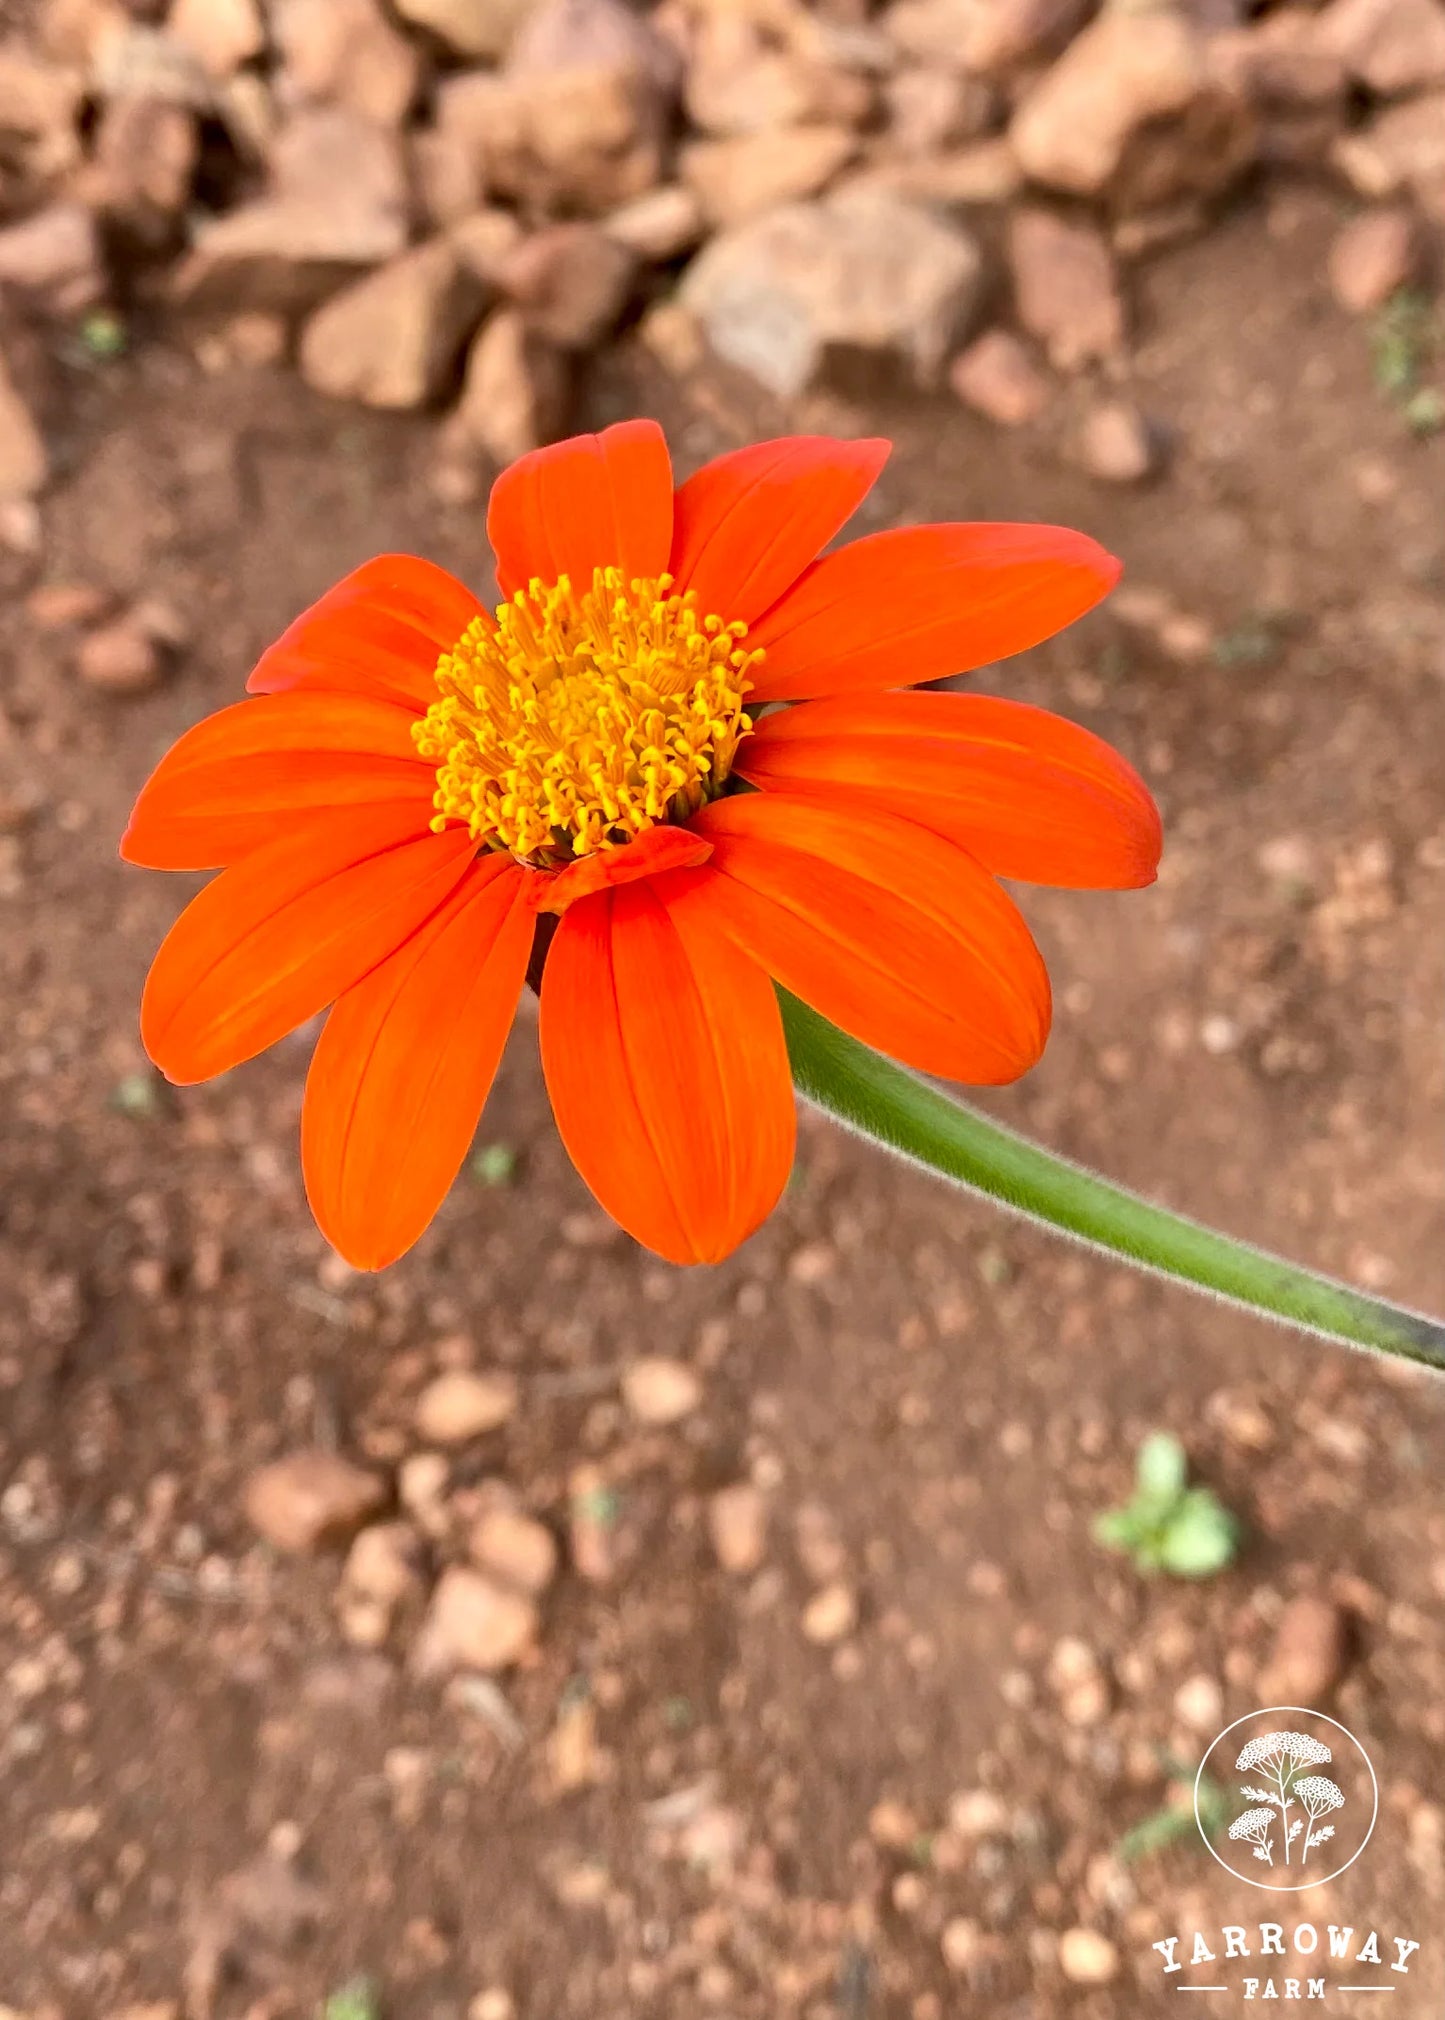 Red Torch Mexican Sunflower